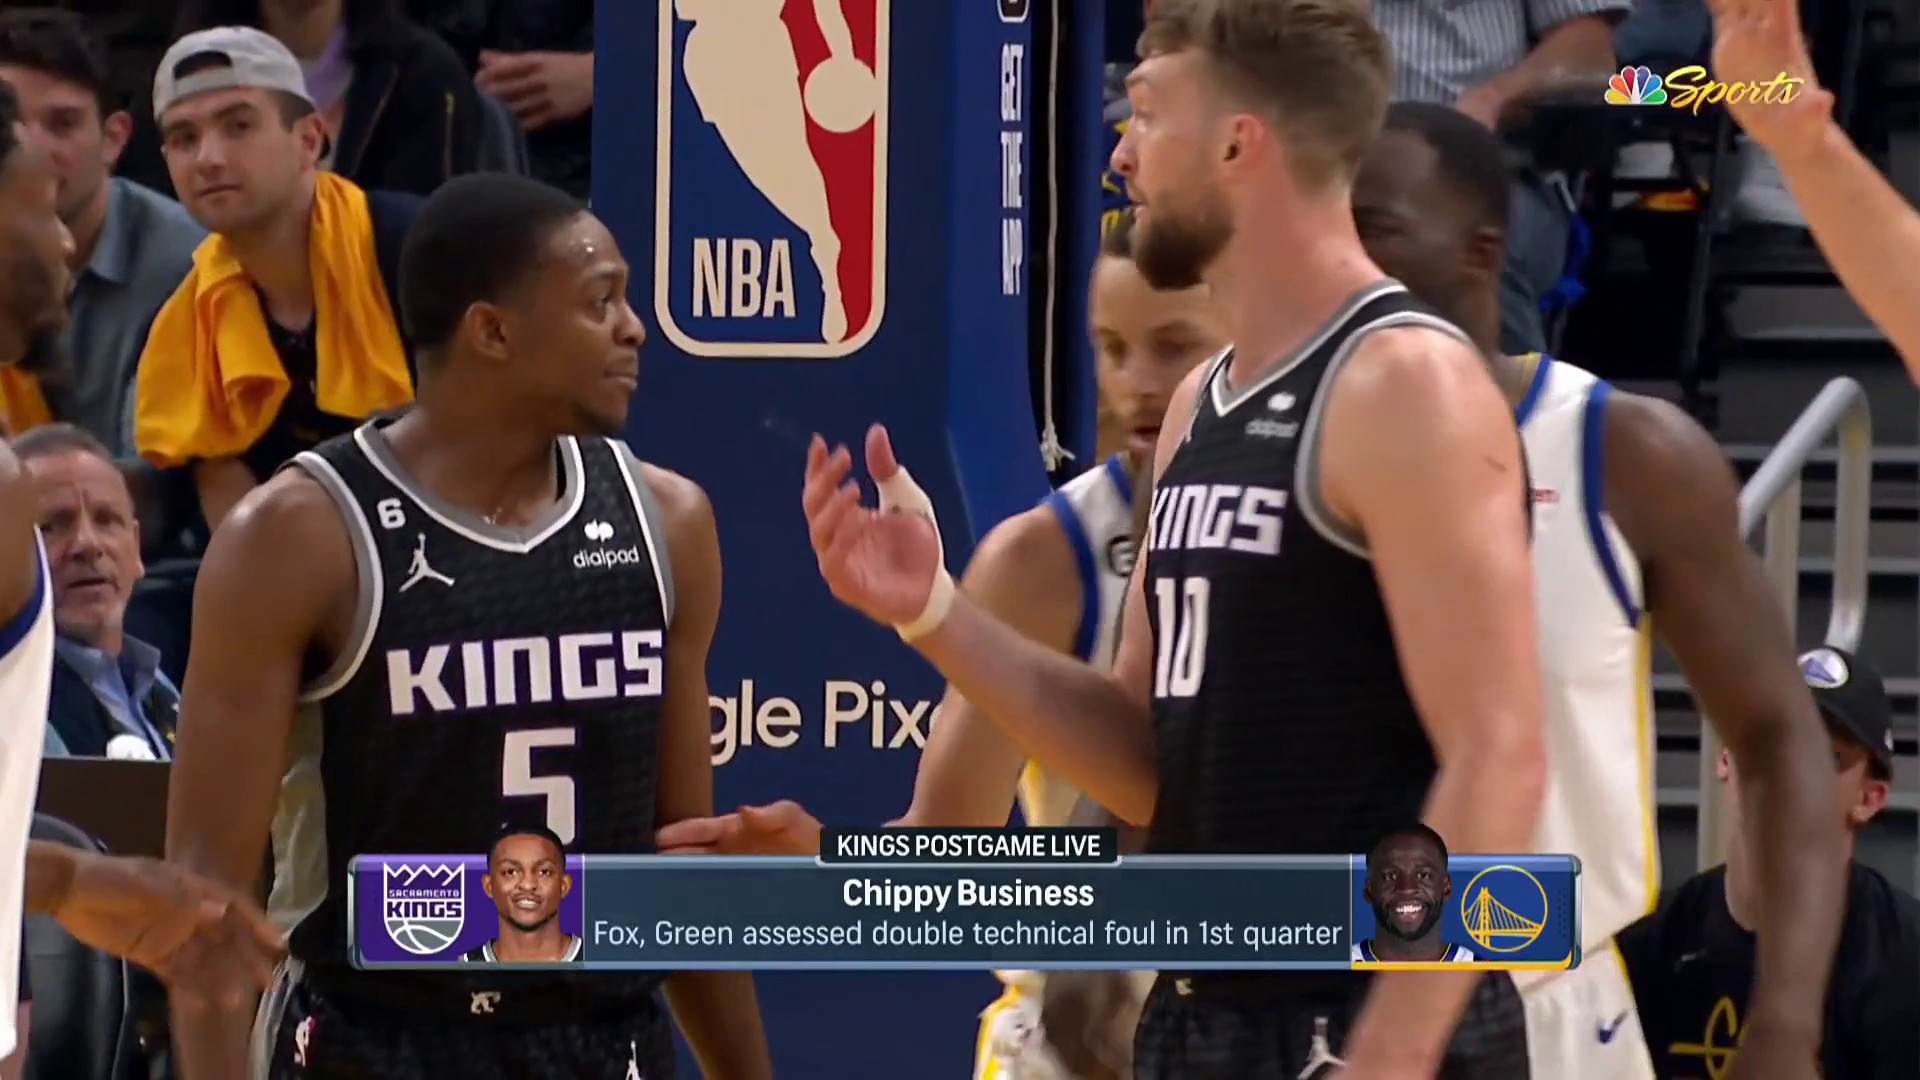 DeAaron Fox drops 38 points on Warriors in Kings Game 4 NBA playoff loss 